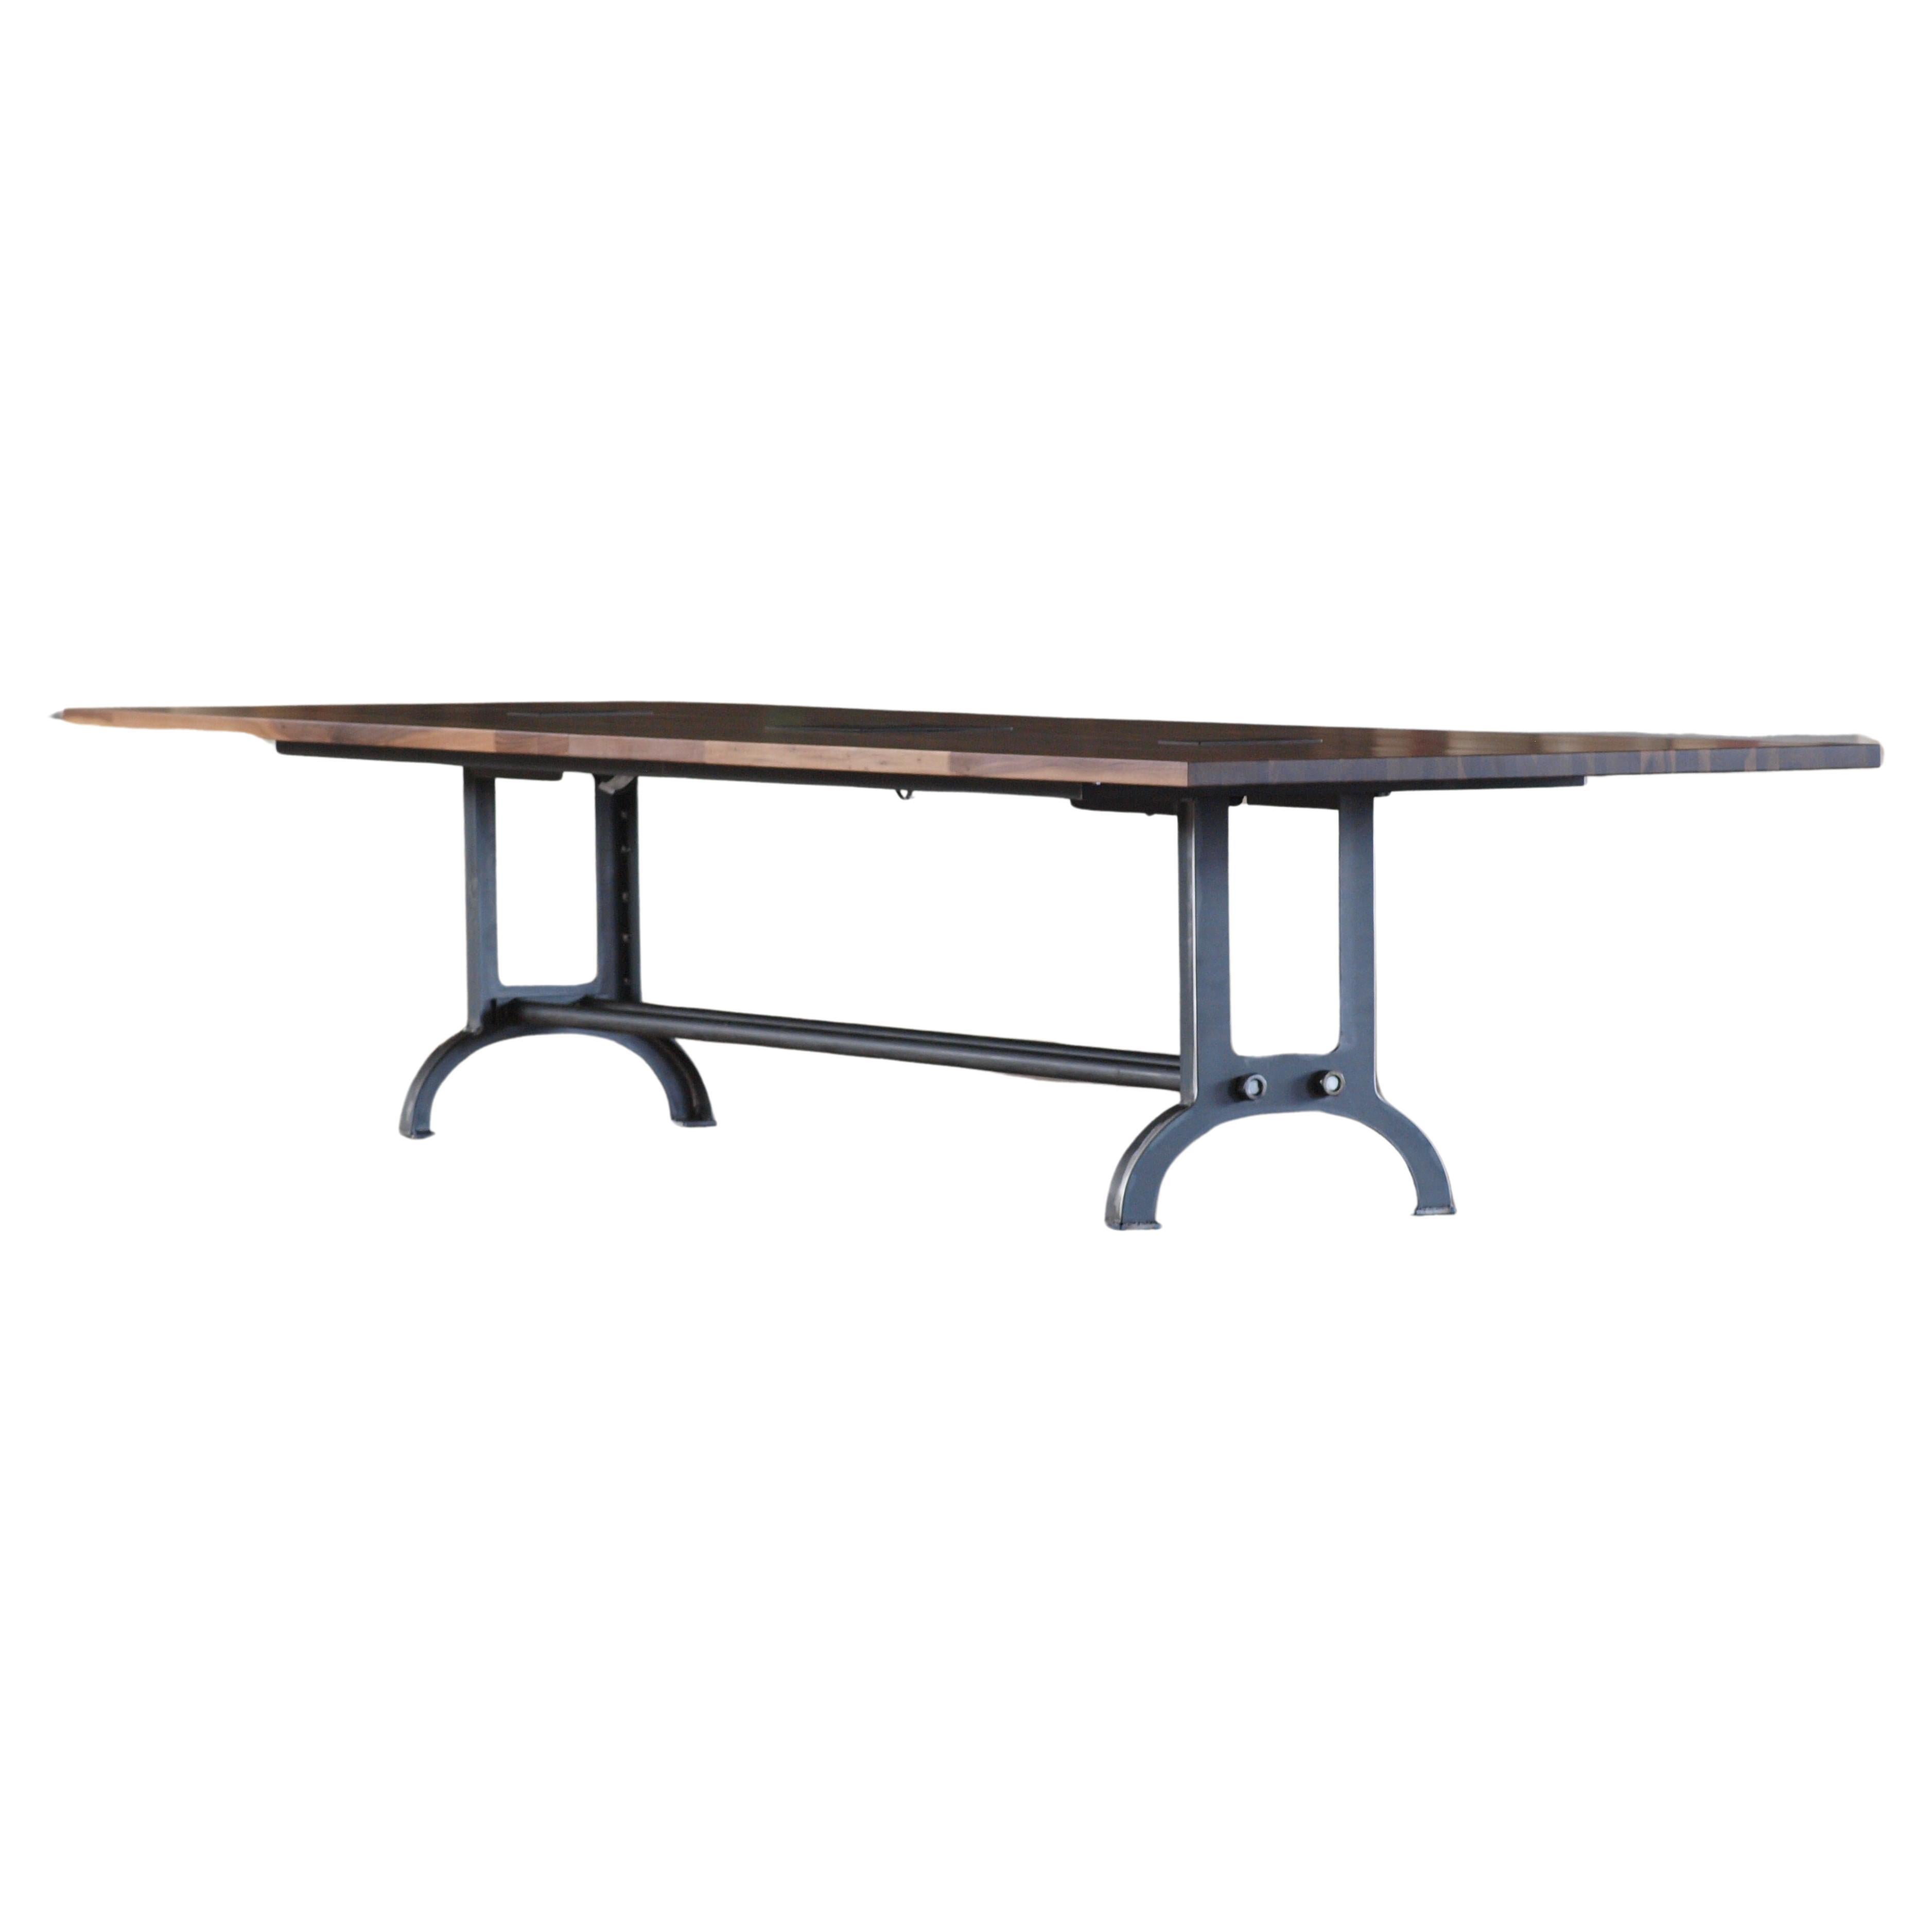 Introducing our exquisite, handcrafted industrial-style walnut conference table, a masterpiece that not only exudes elegance but also offers versatile functionality. While it is commonly employed as a commanding centerpiece for conference rooms, its